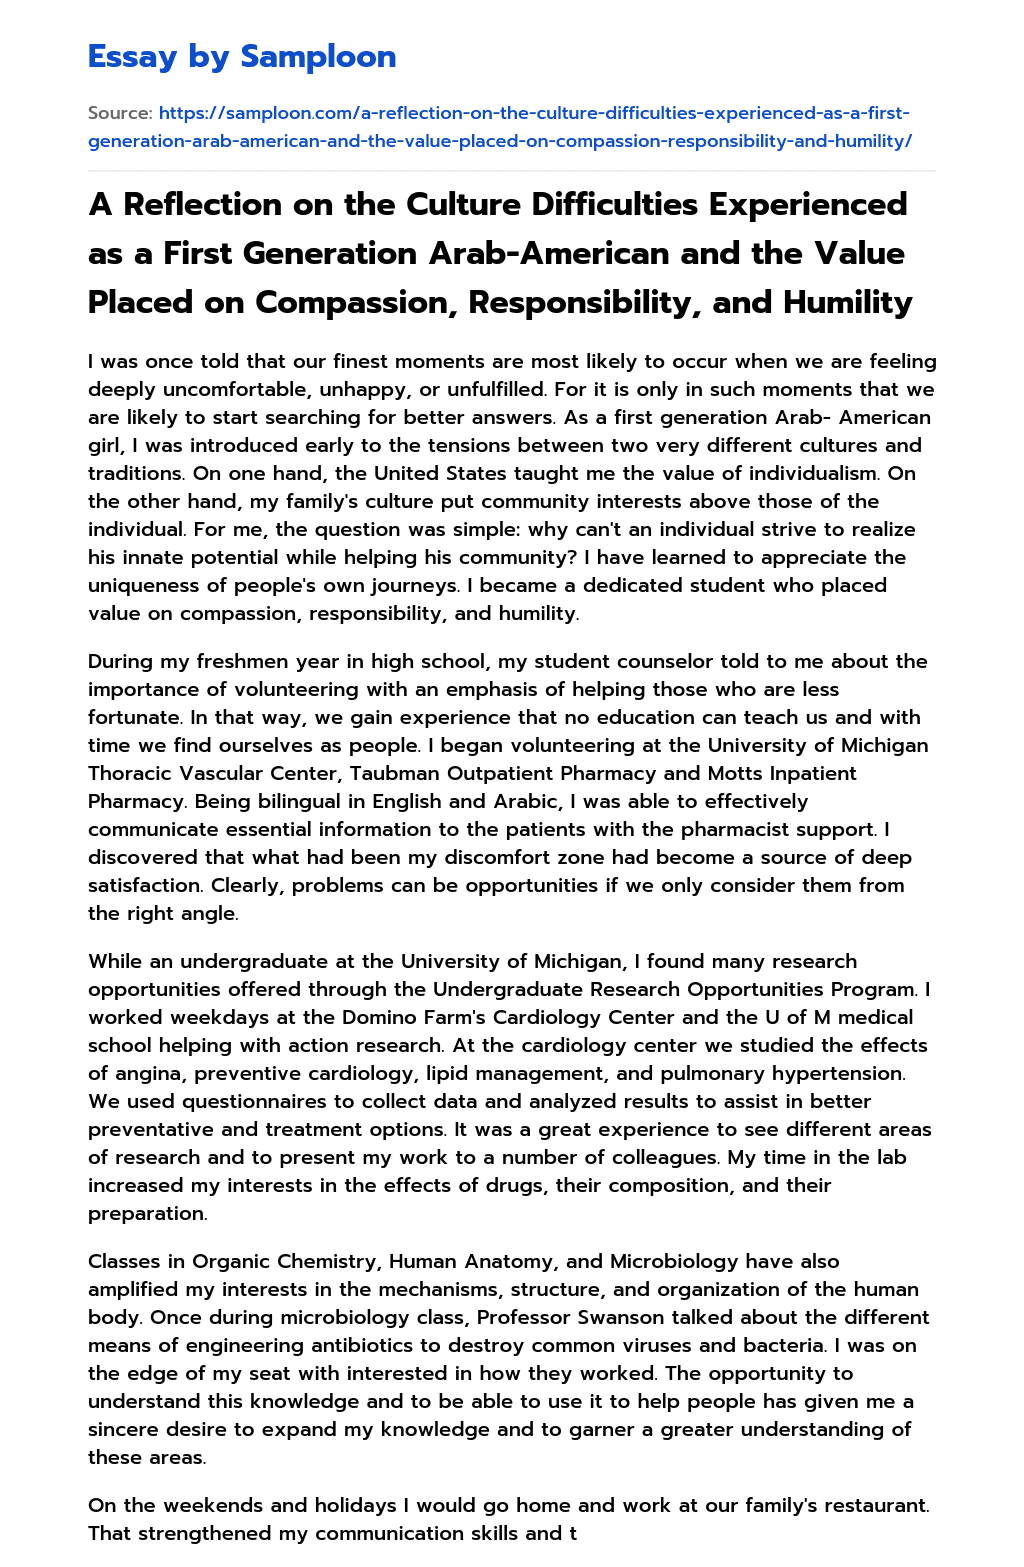 A Reflection on the Culture Difficulties Experienced as a First Generation Arab-American and the Value Placed on Compassion, Responsibility, and Humility essay